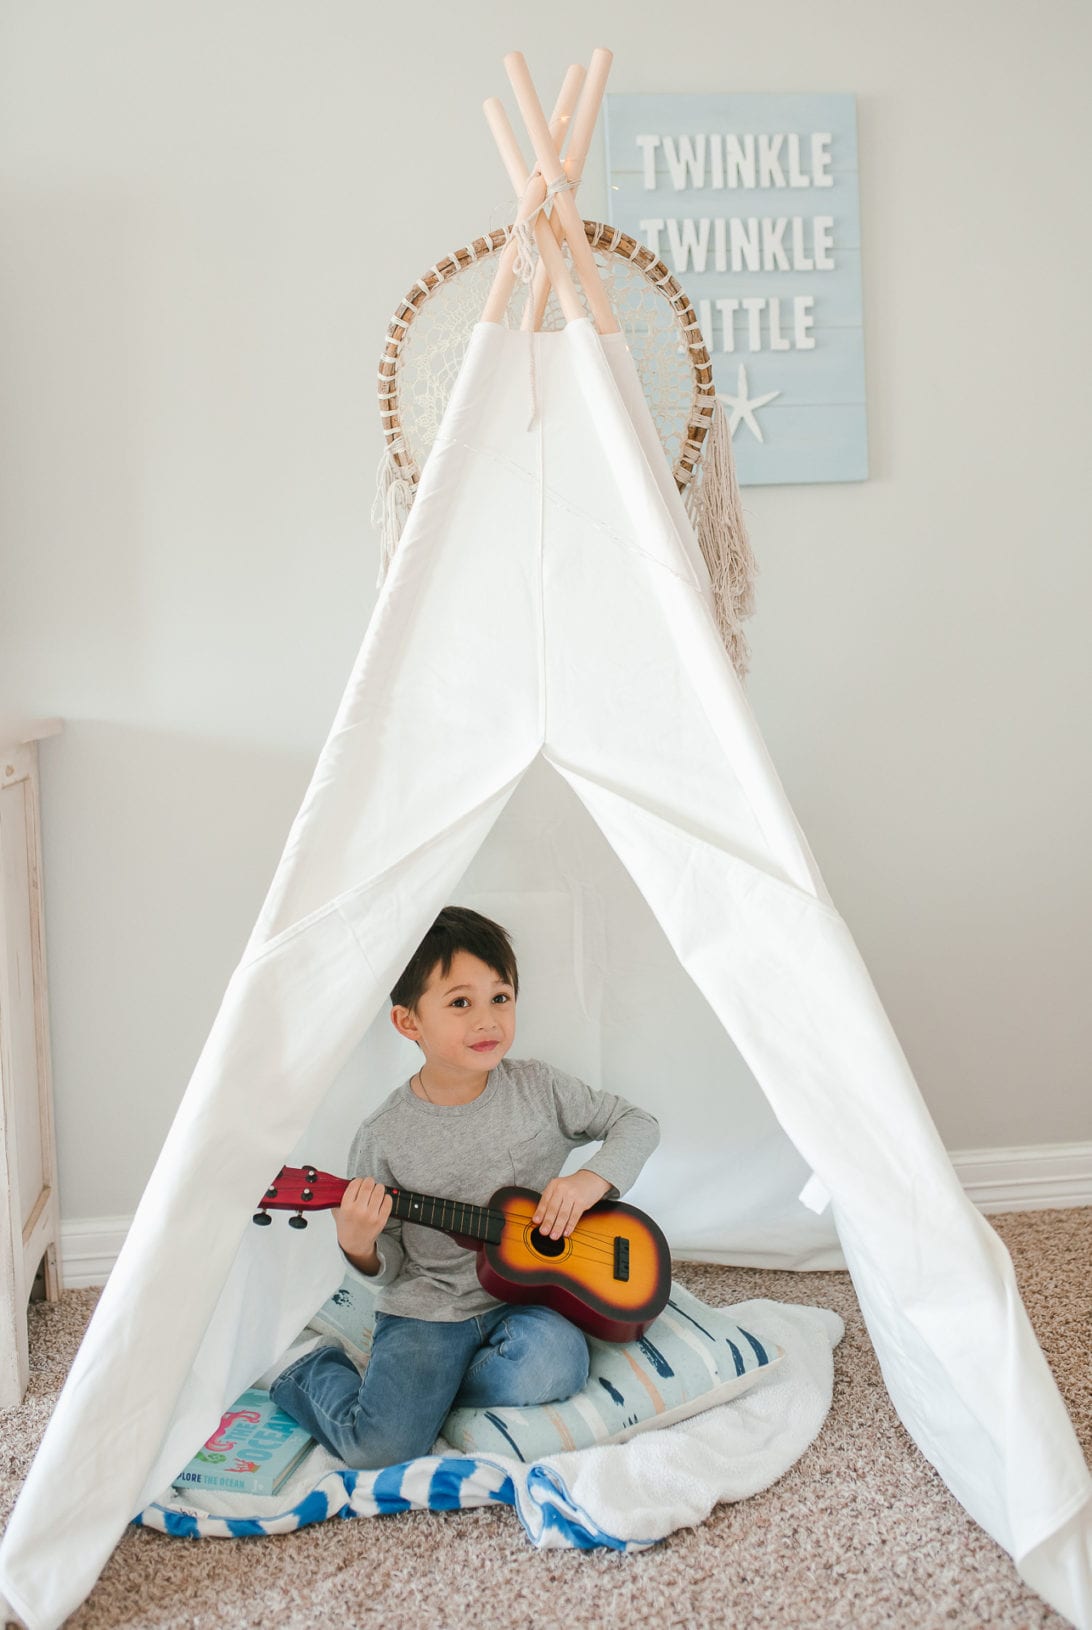 children's teepee, tent, white tent, game room, Portable Kids Cotton Canvas Teepee Indina Play Tent Playhouse, Class White One Window Style 